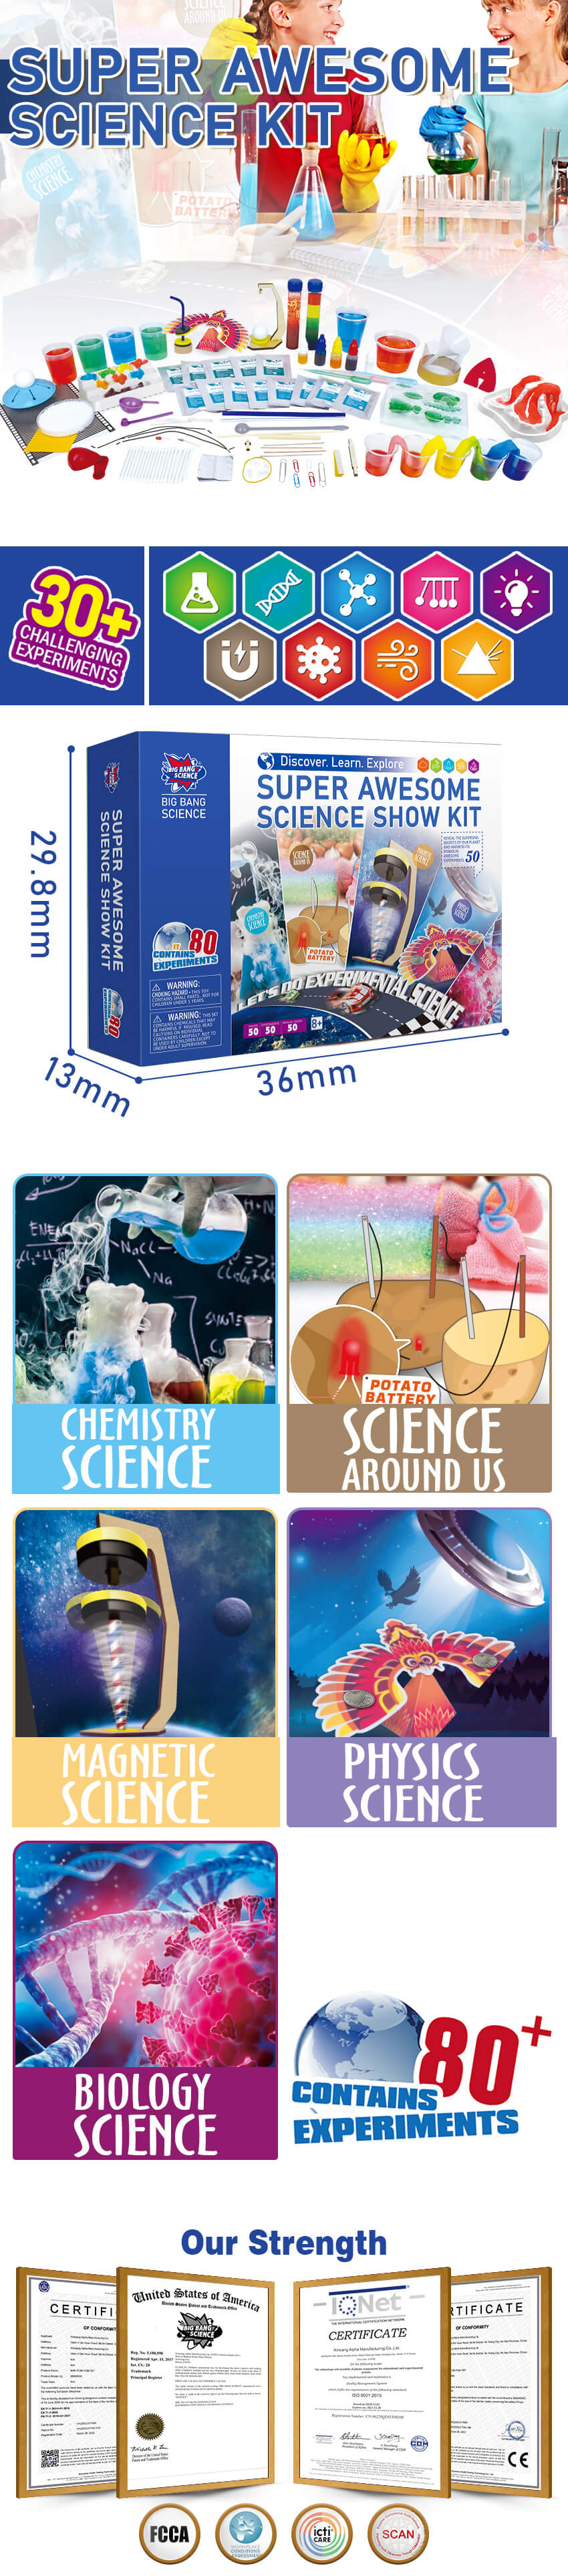 Super-Awesome-Science-Kit-Product-detail-map